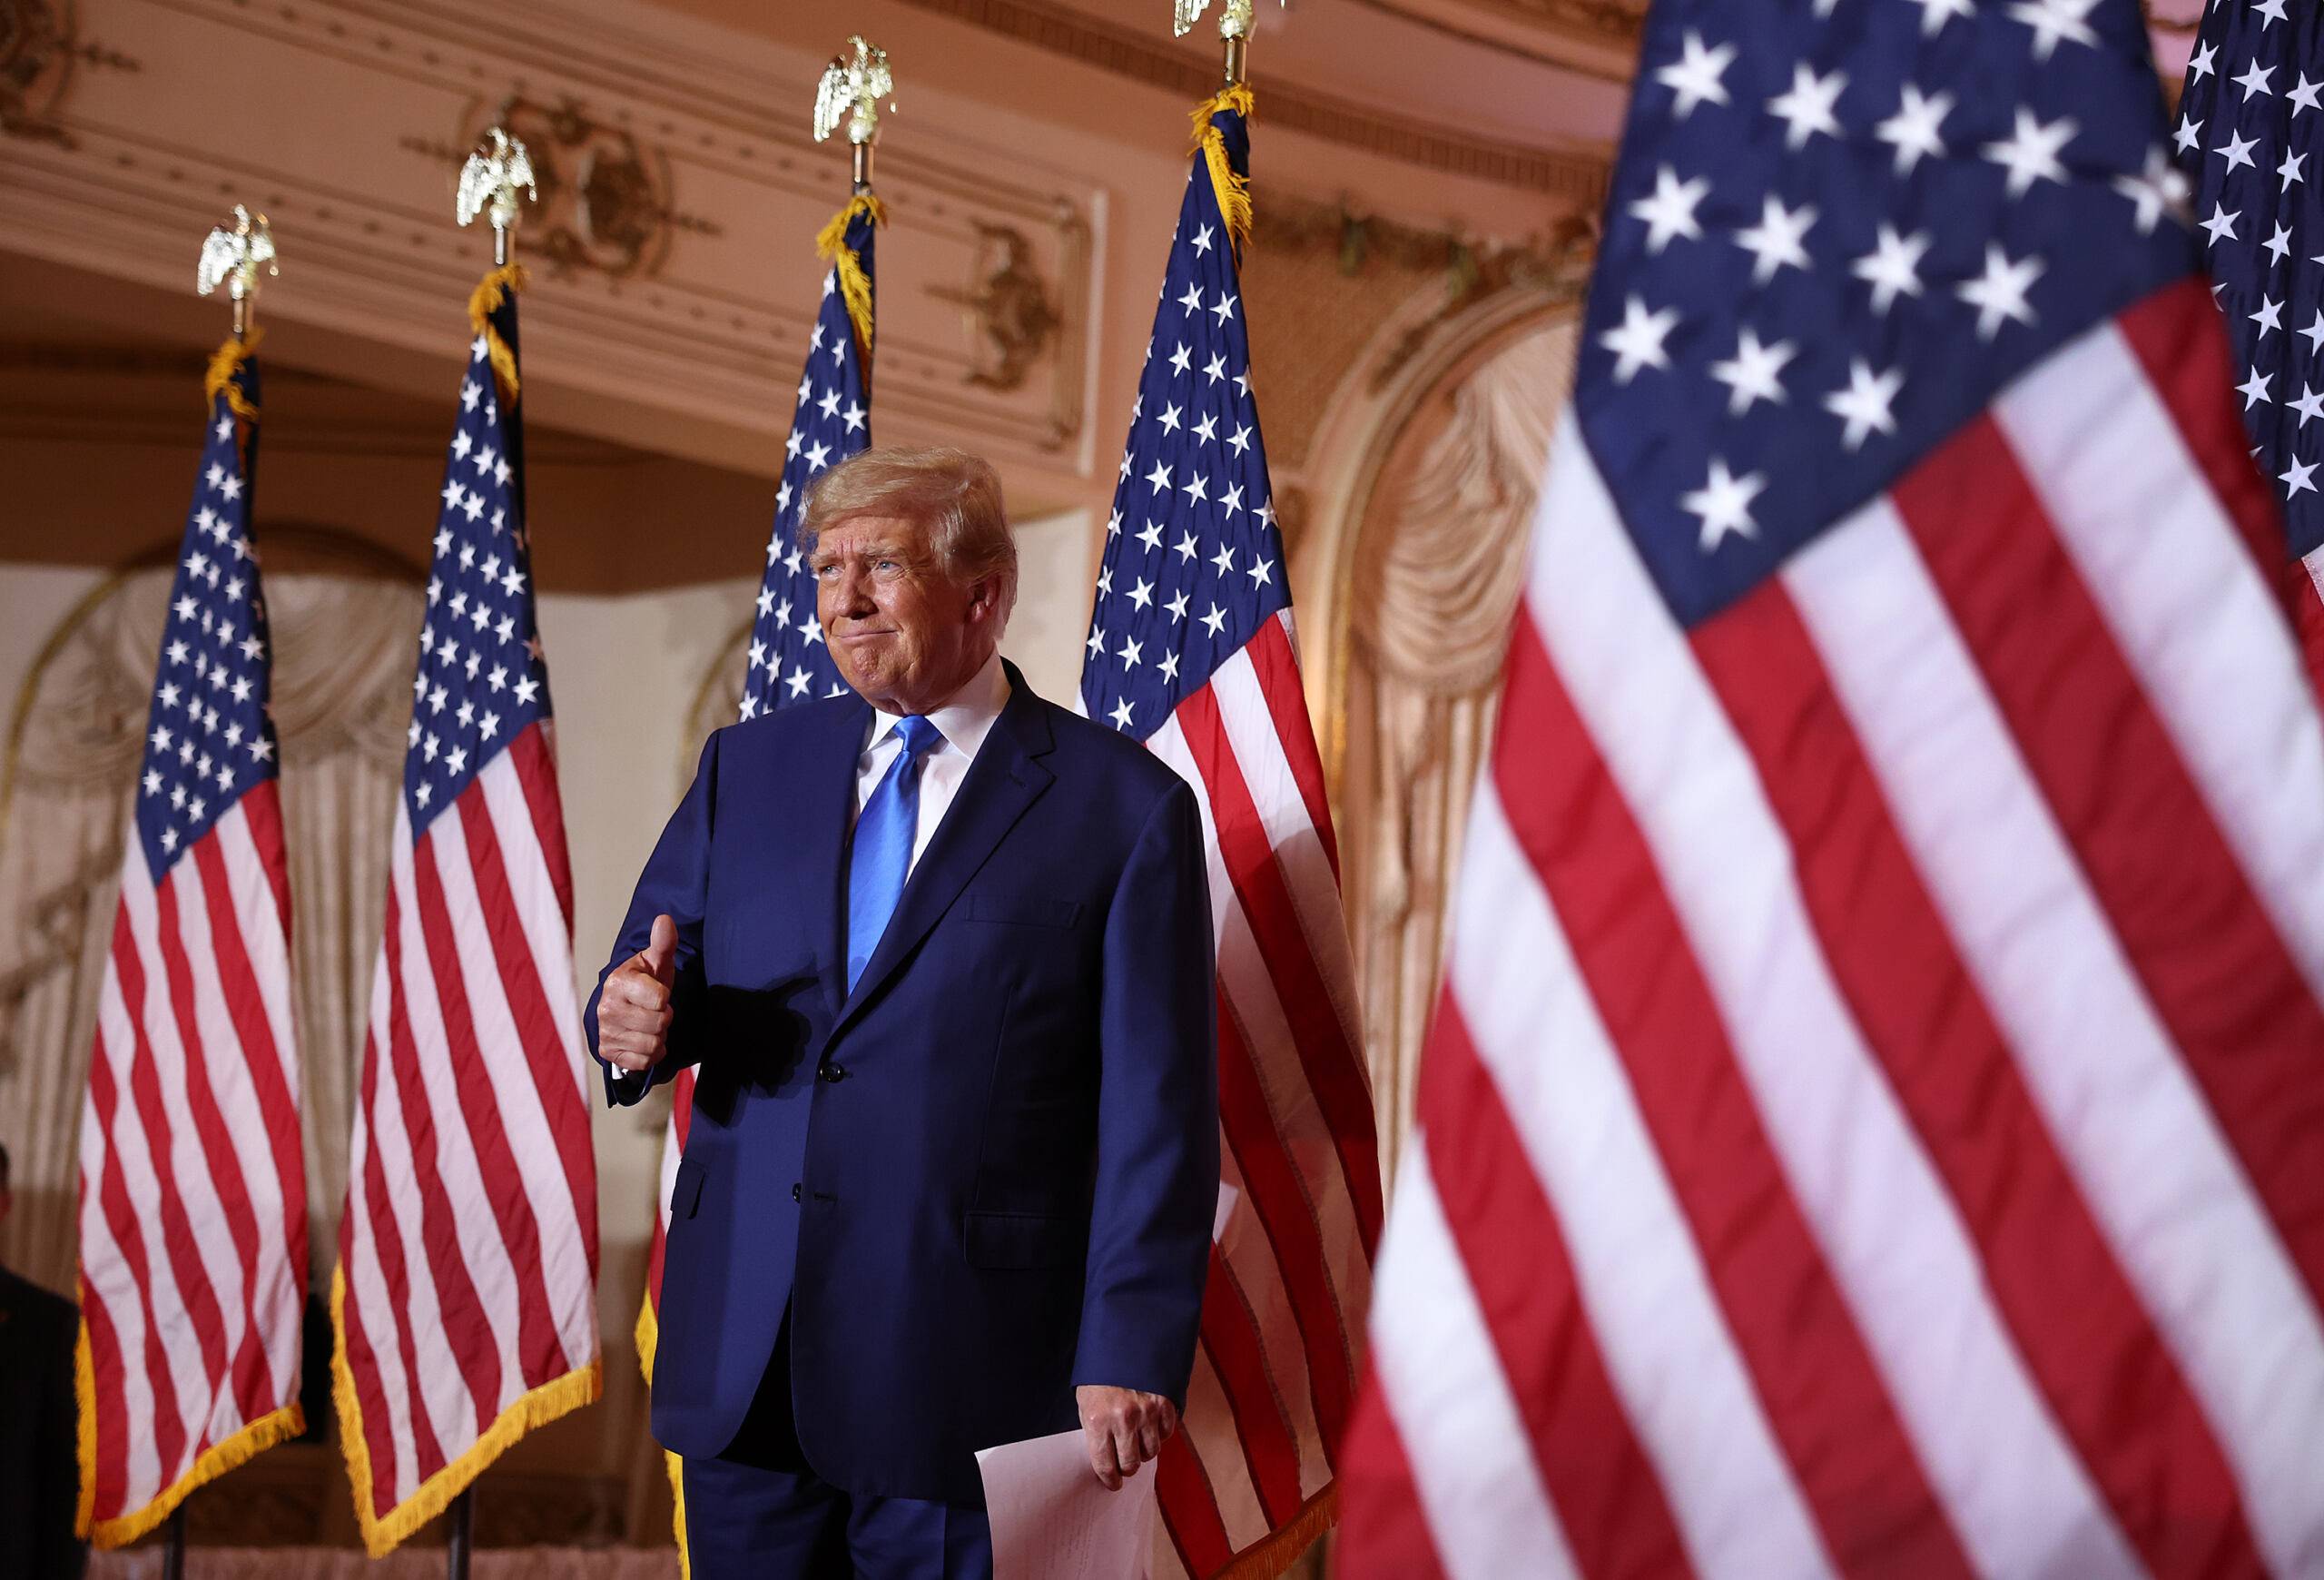 PALM BEACH, FLORIDA - NOVEMBER 08: Former U.S. President Donald Trump speaks during an election night event at Mar-a-Lago on November 08, 2022 in Palm Beach, Florida. Trump addressed his supporters as the nation awaits the results of the midterm elections.   Joe Raedle/Getty Images/AFP (Photo by JOE RAEDLE / GETTY IMAGES NORTH AMERICA / Getty Images via AFP)